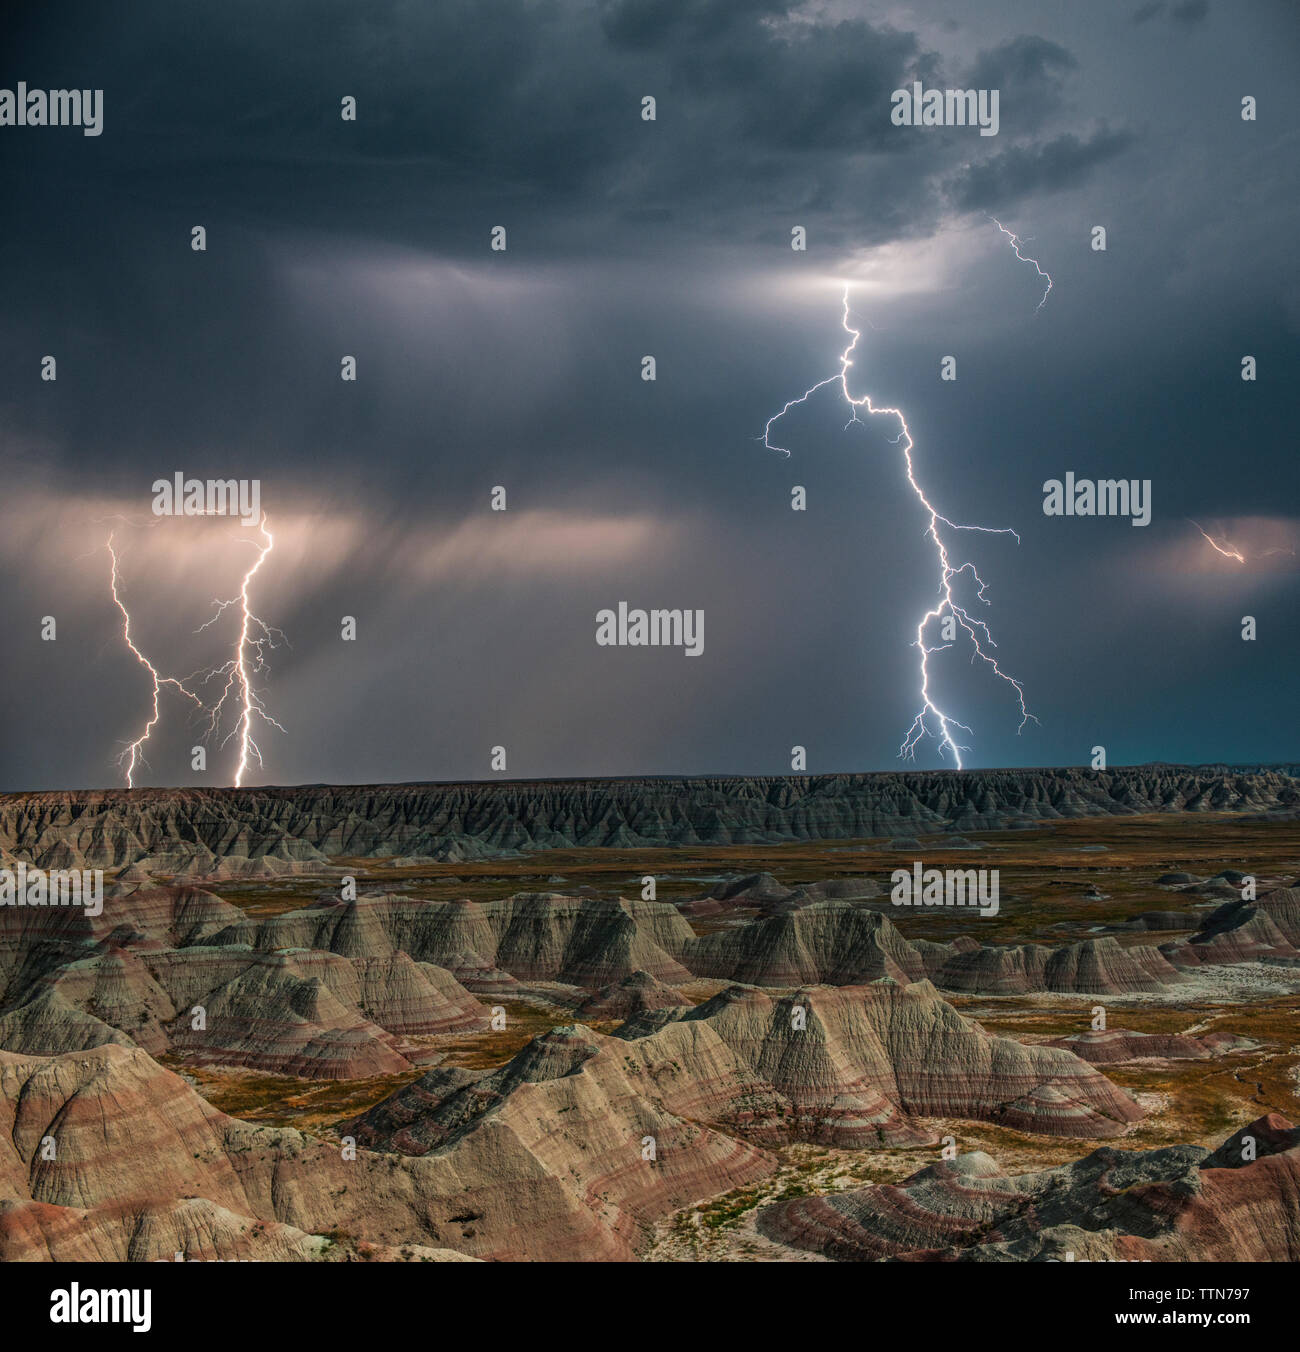 High angle majestic view of rock formations at Badlands National Park against thunderstorm and lightning Stock Photo